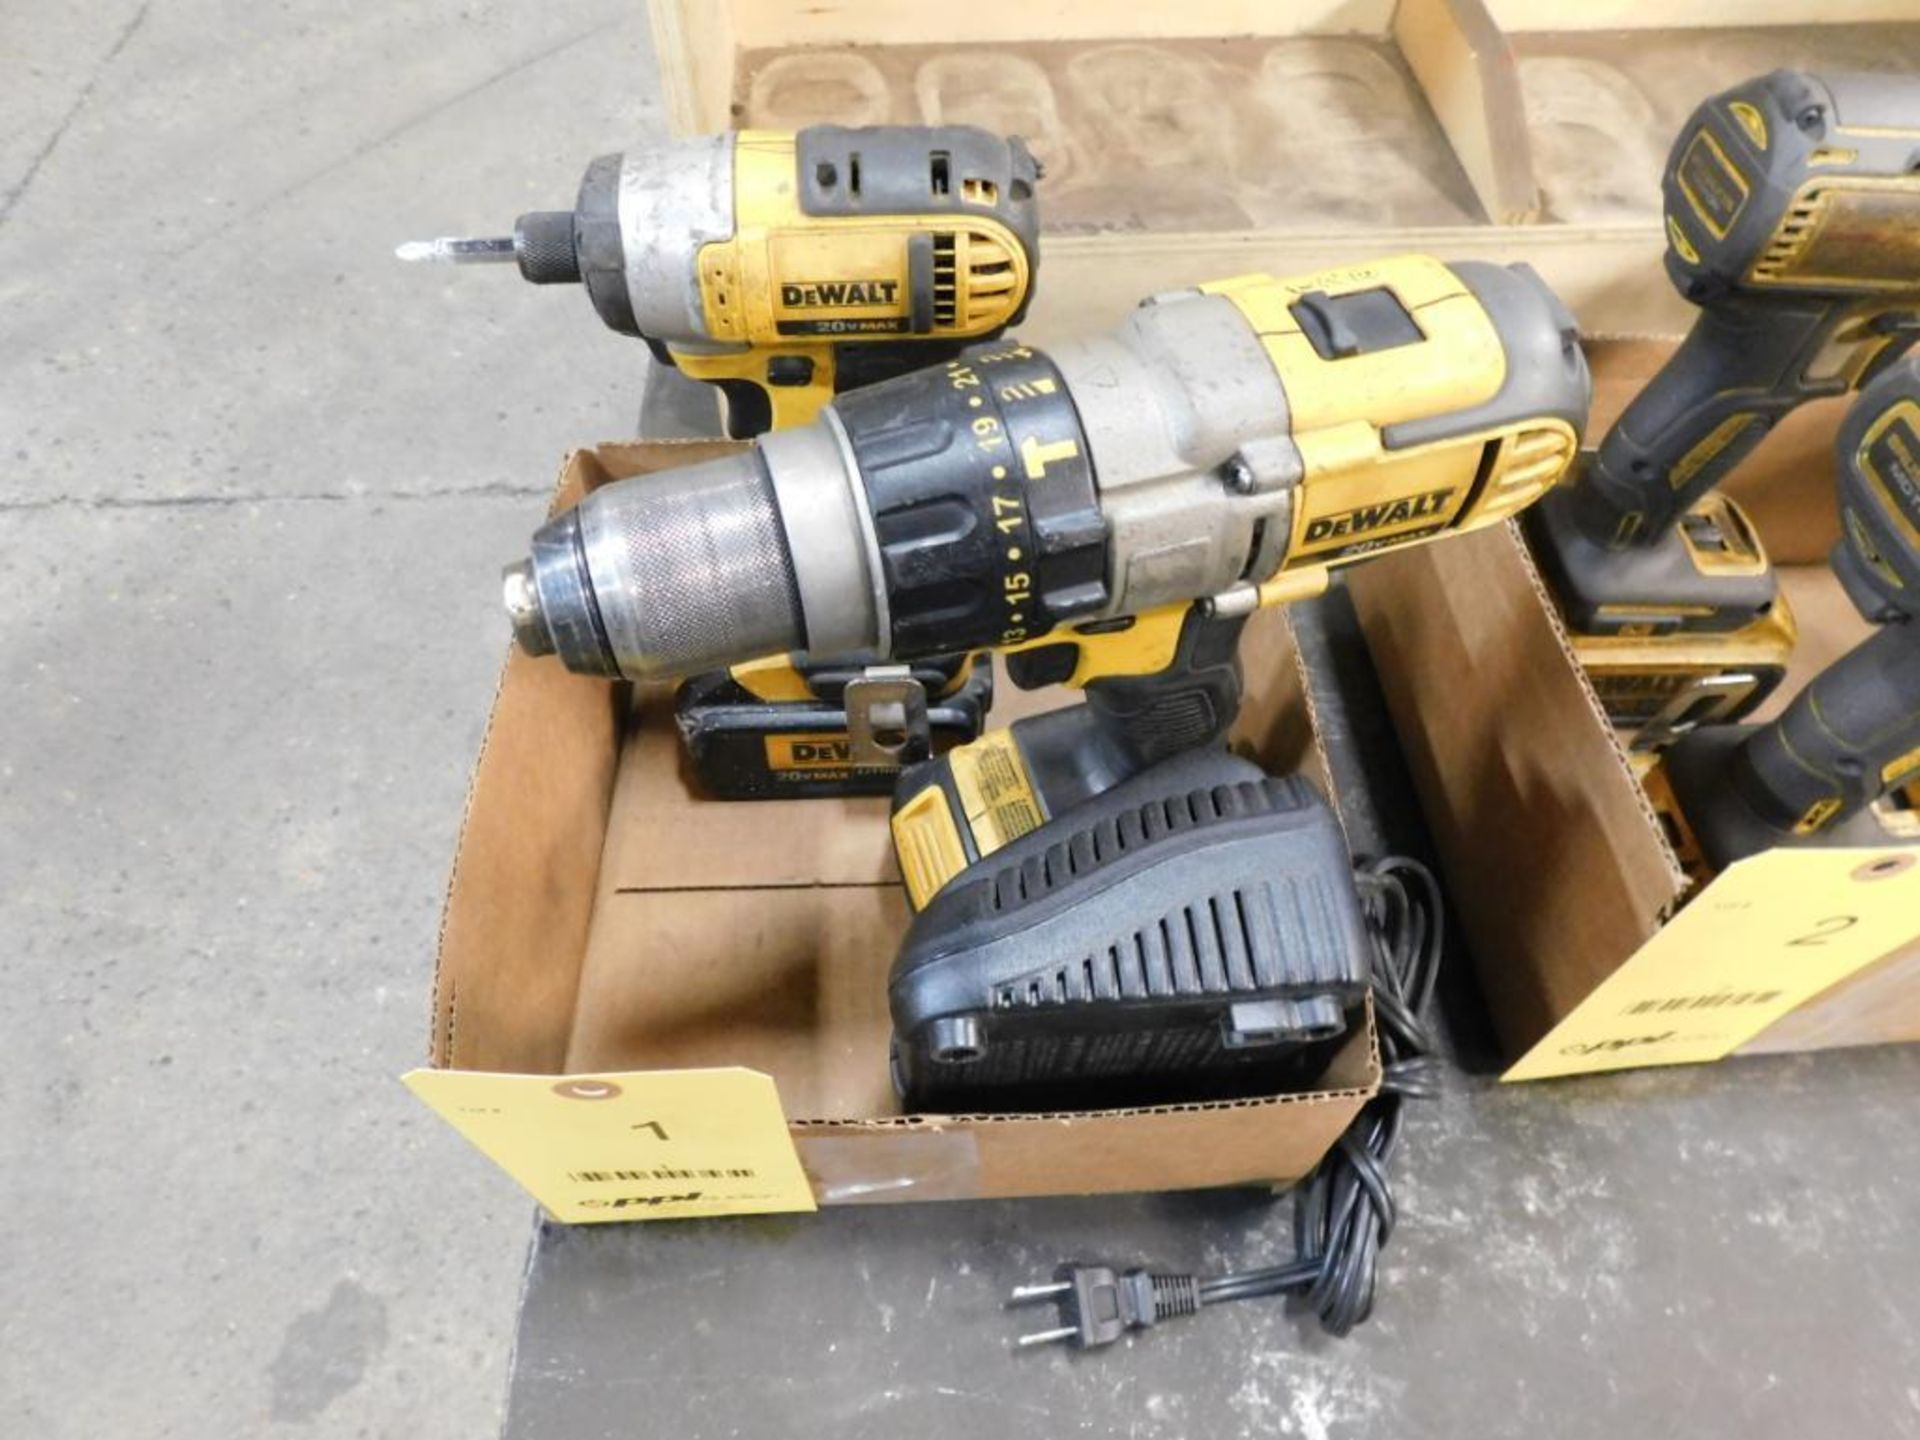 LOT: (1) Dewalt 1/2 in. Cordless Drill with Battery, (1) Dewalt 1/4 in. Cordless Impact Driver, with